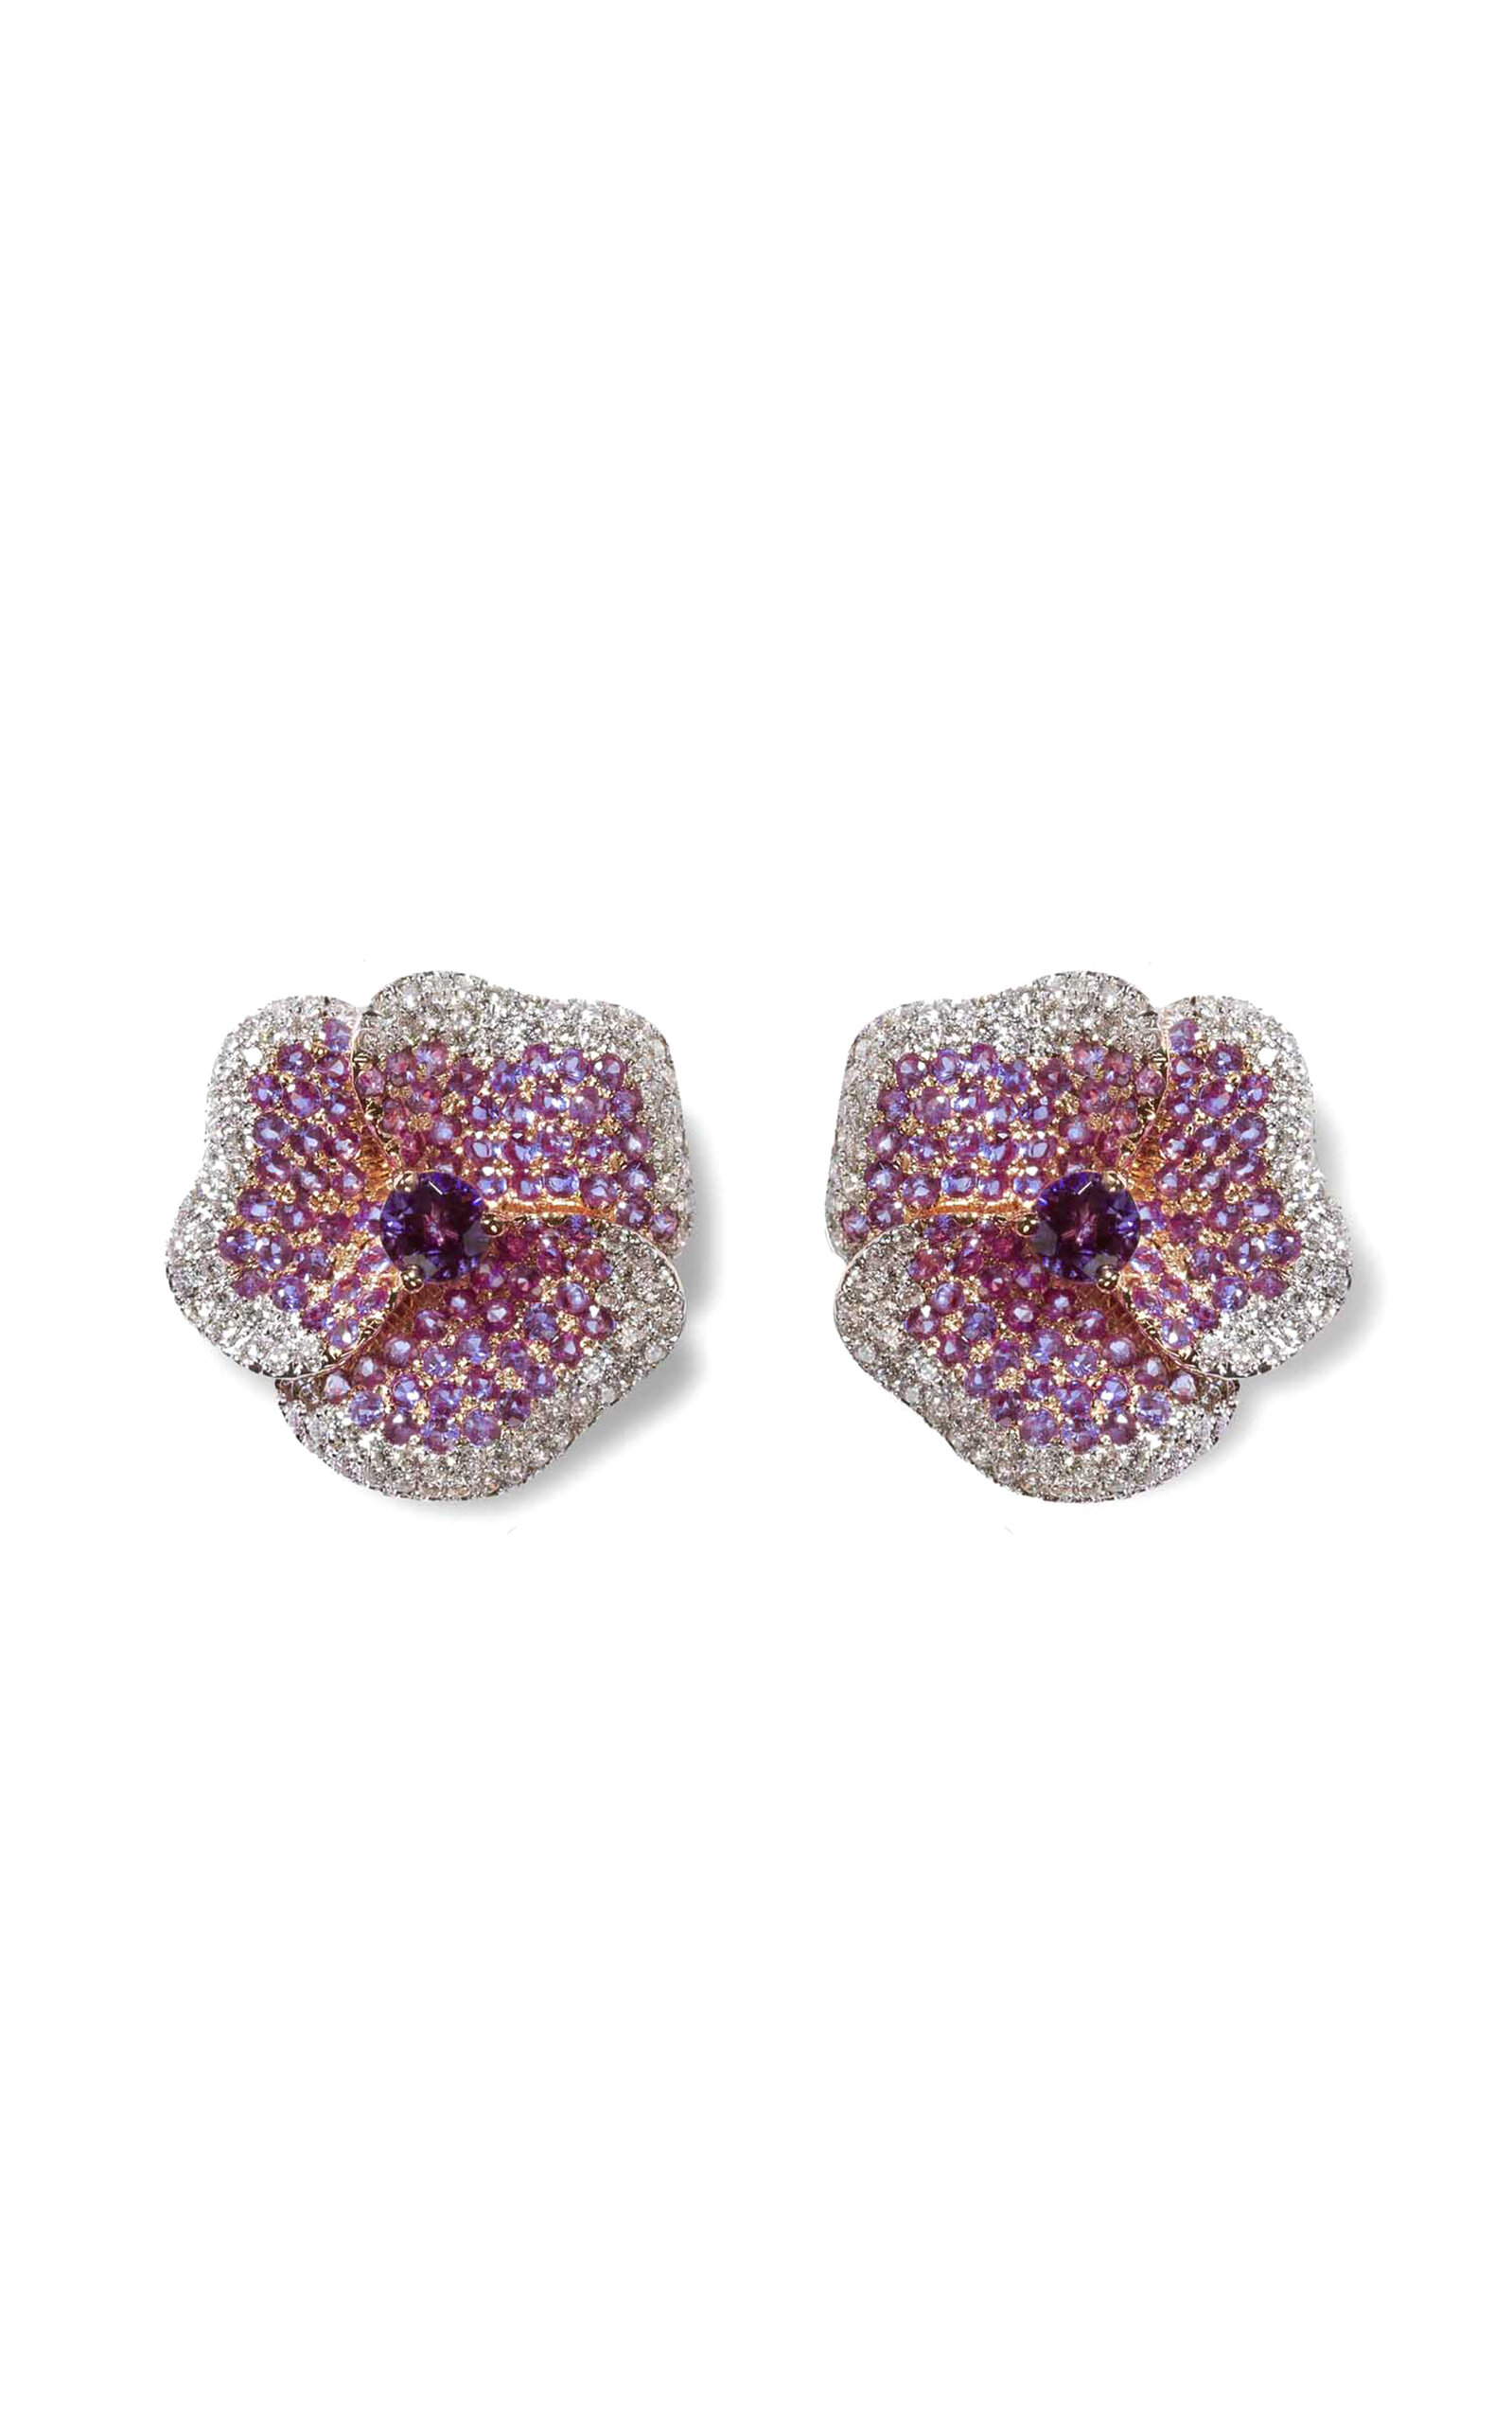 As29 One Of A Kind Bloom 18k Rose Gold; Diamond; And Amethyst Earrings In Purple